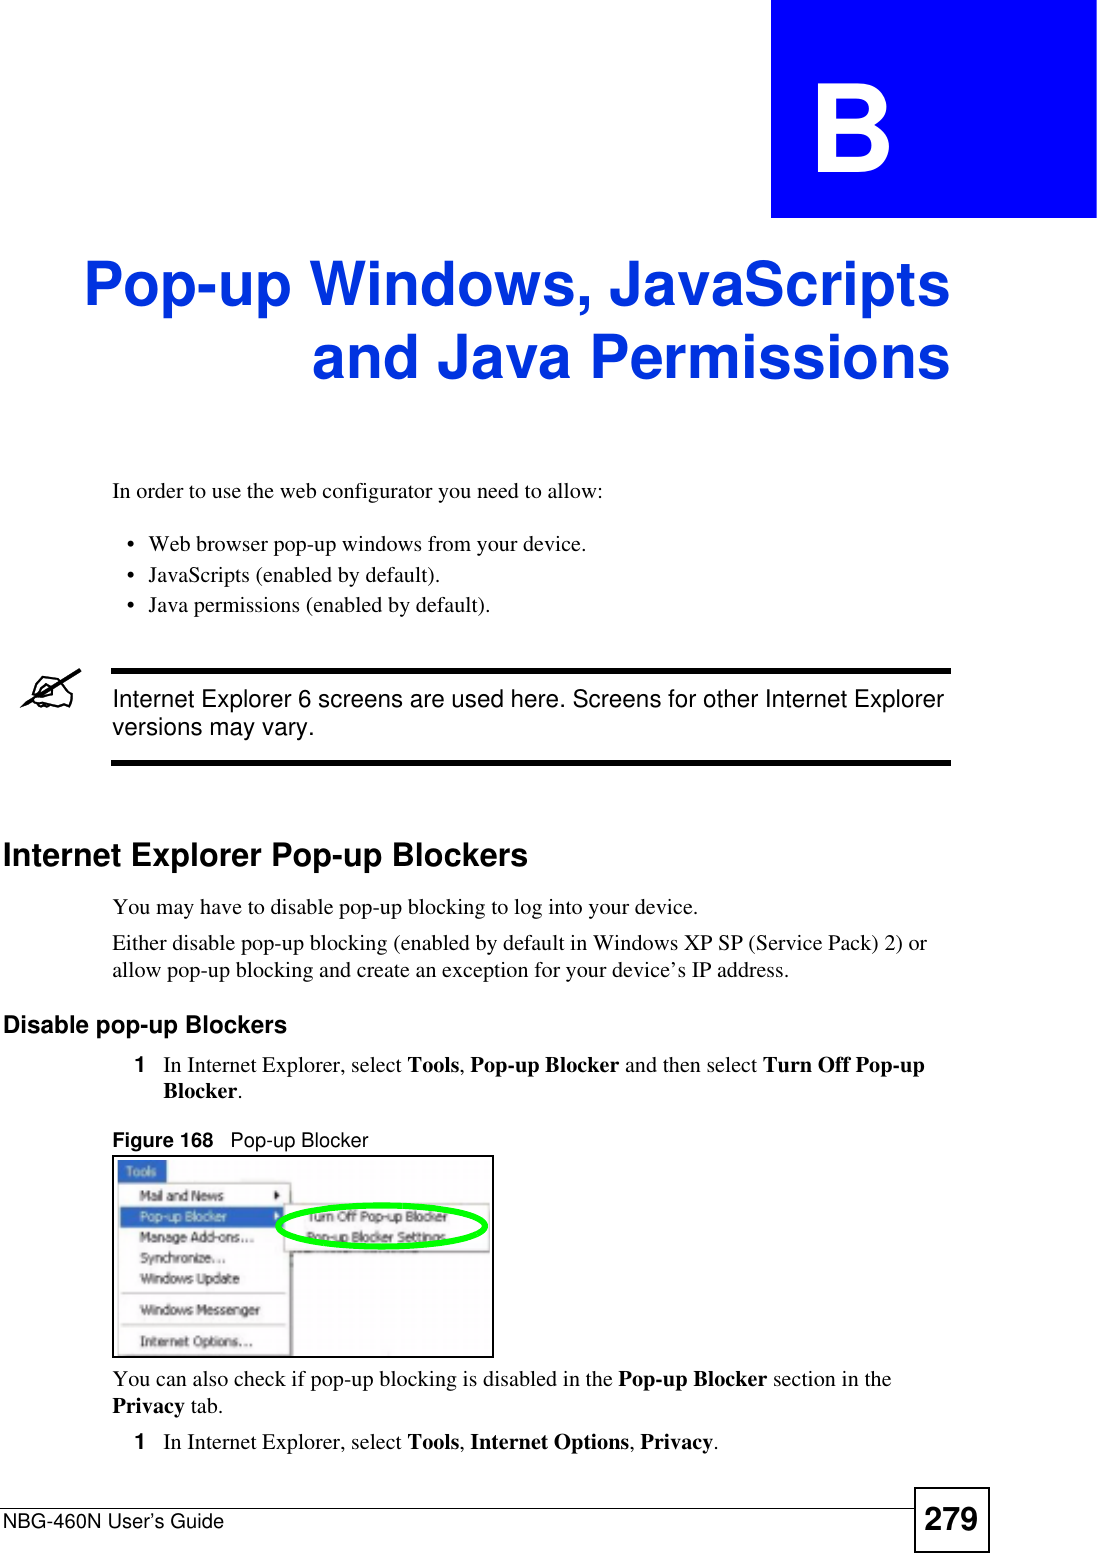 NBG-460N User’s Guide 279APPENDIX  B Pop-up Windows, JavaScriptsand Java PermissionsIn order to use the web configurator you need to allow:• Web browser pop-up windows from your device.• JavaScripts (enabled by default).• Java permissions (enabled by default).&quot;Internet Explorer 6 screens are used here. Screens for other Internet Explorer versions may vary.Internet Explorer Pop-up BlockersYou may have to disable pop-up blocking to log into your device. Either disable pop-up blocking (enabled by default in Windows XP SP (Service Pack) 2) or allow pop-up blocking and create an exception for your device’s IP address.Disable pop-up Blockers1In Internet Explorer, select Tools,Pop-up Blocker and then select Turn Off Pop-up Blocker.Figure 168   Pop-up BlockerYou can also check if pop-up blocking is disabled in the Pop-up Blocker section in the Privacy tab. 1In Internet Explorer, select Tools,Internet Options,Privacy.